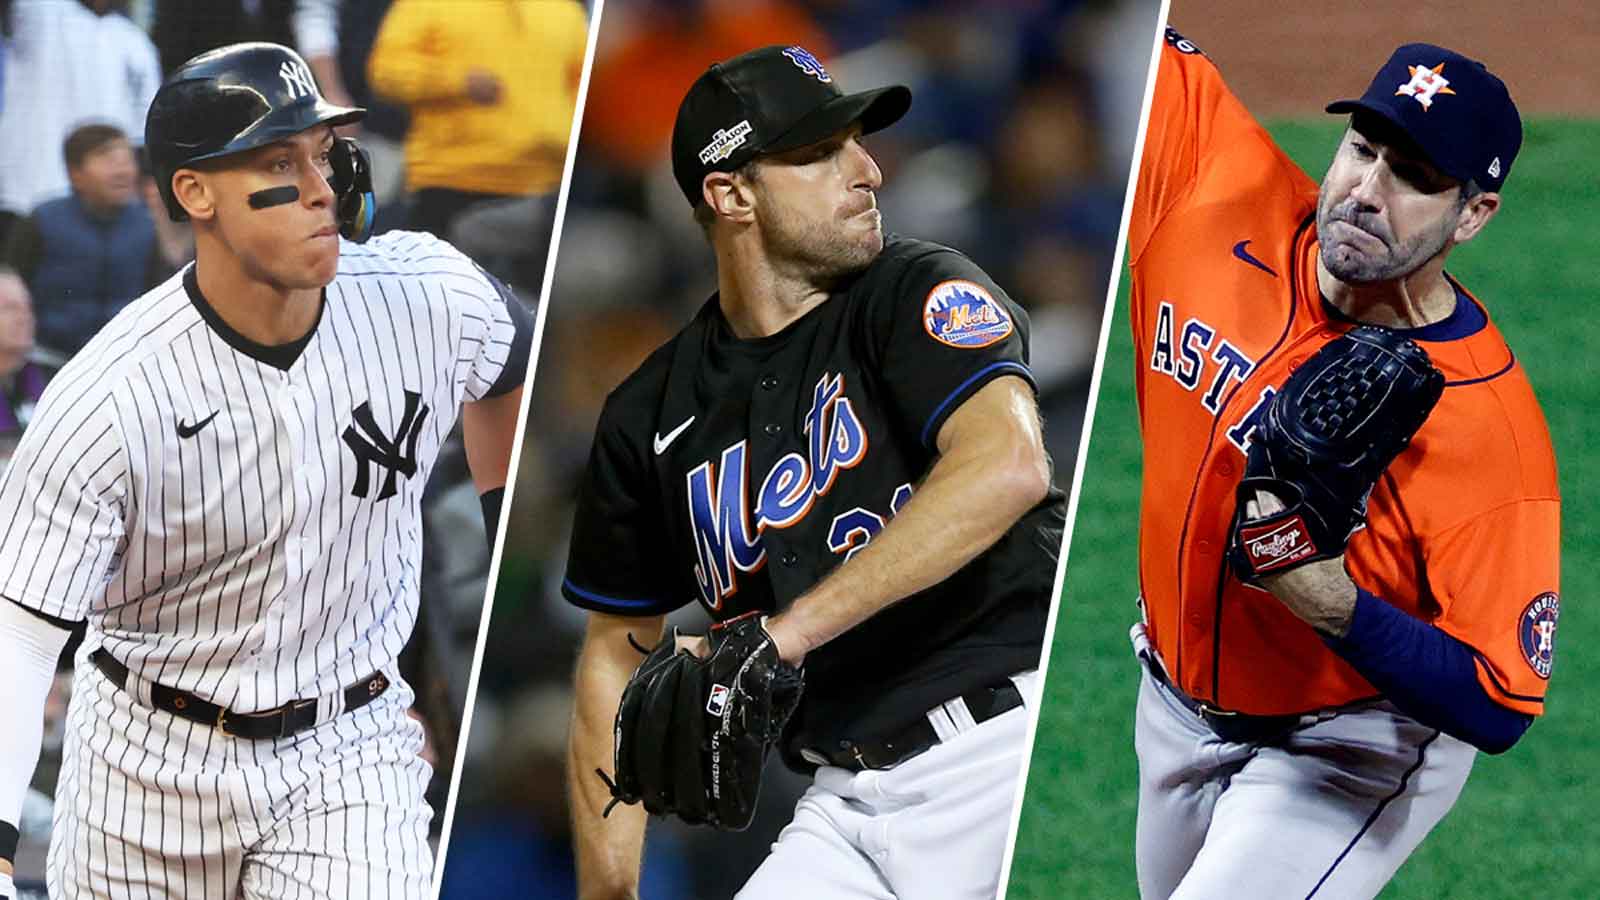 Who Are the Highest-Paid Baseball Players?